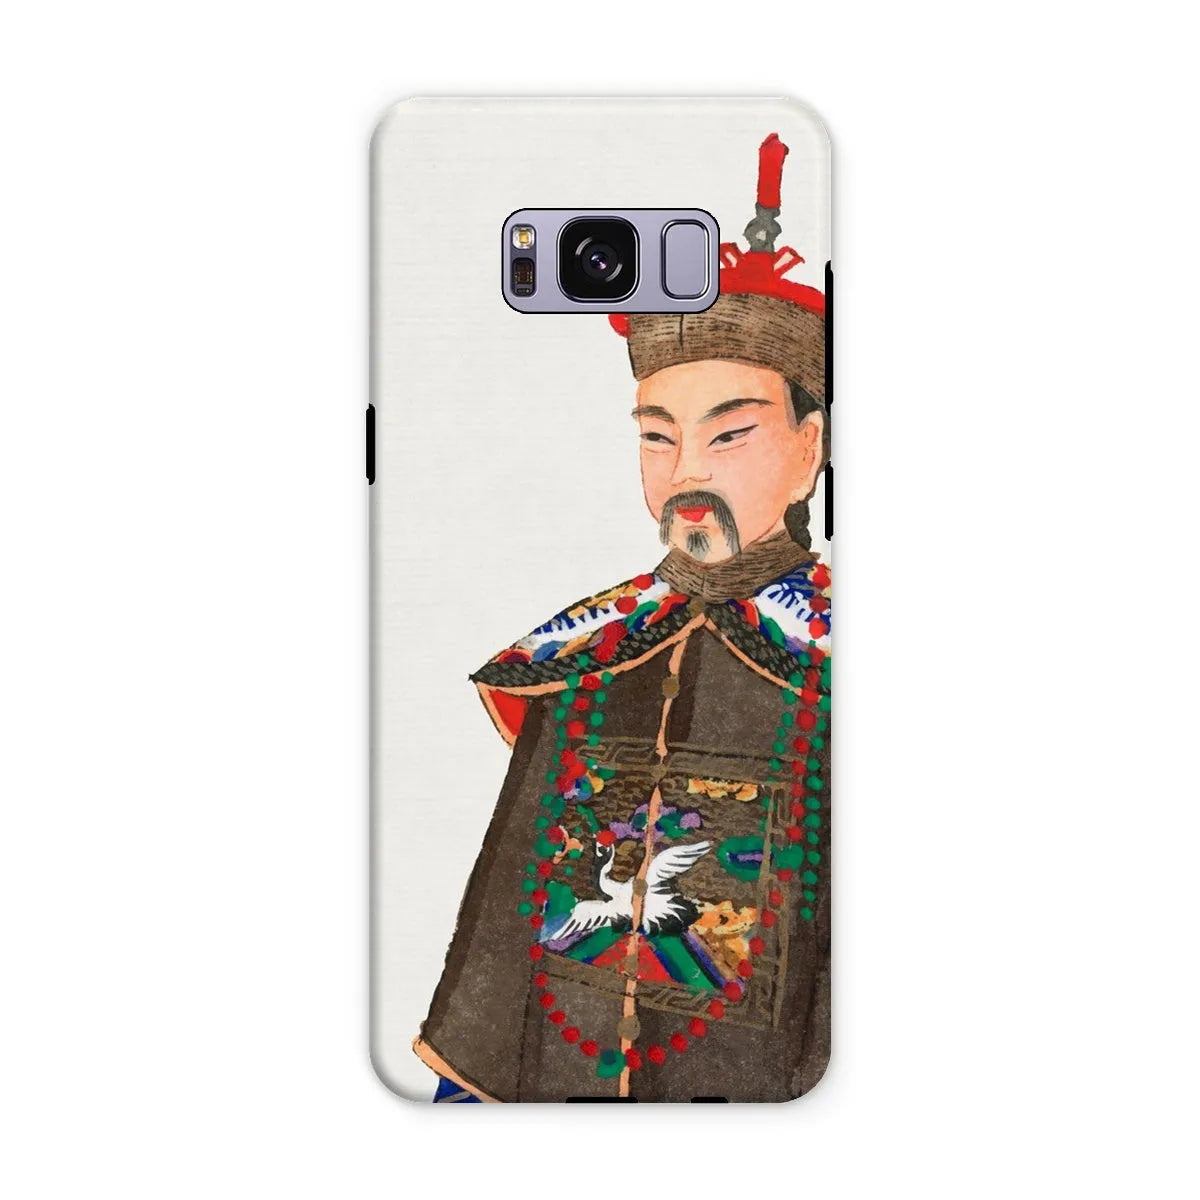 Nobleman At Court - Chinese Aesthetic Manchu Art Phone Case - Samsung Galaxy S8 Plus / Matte - Mobile Phone Cases